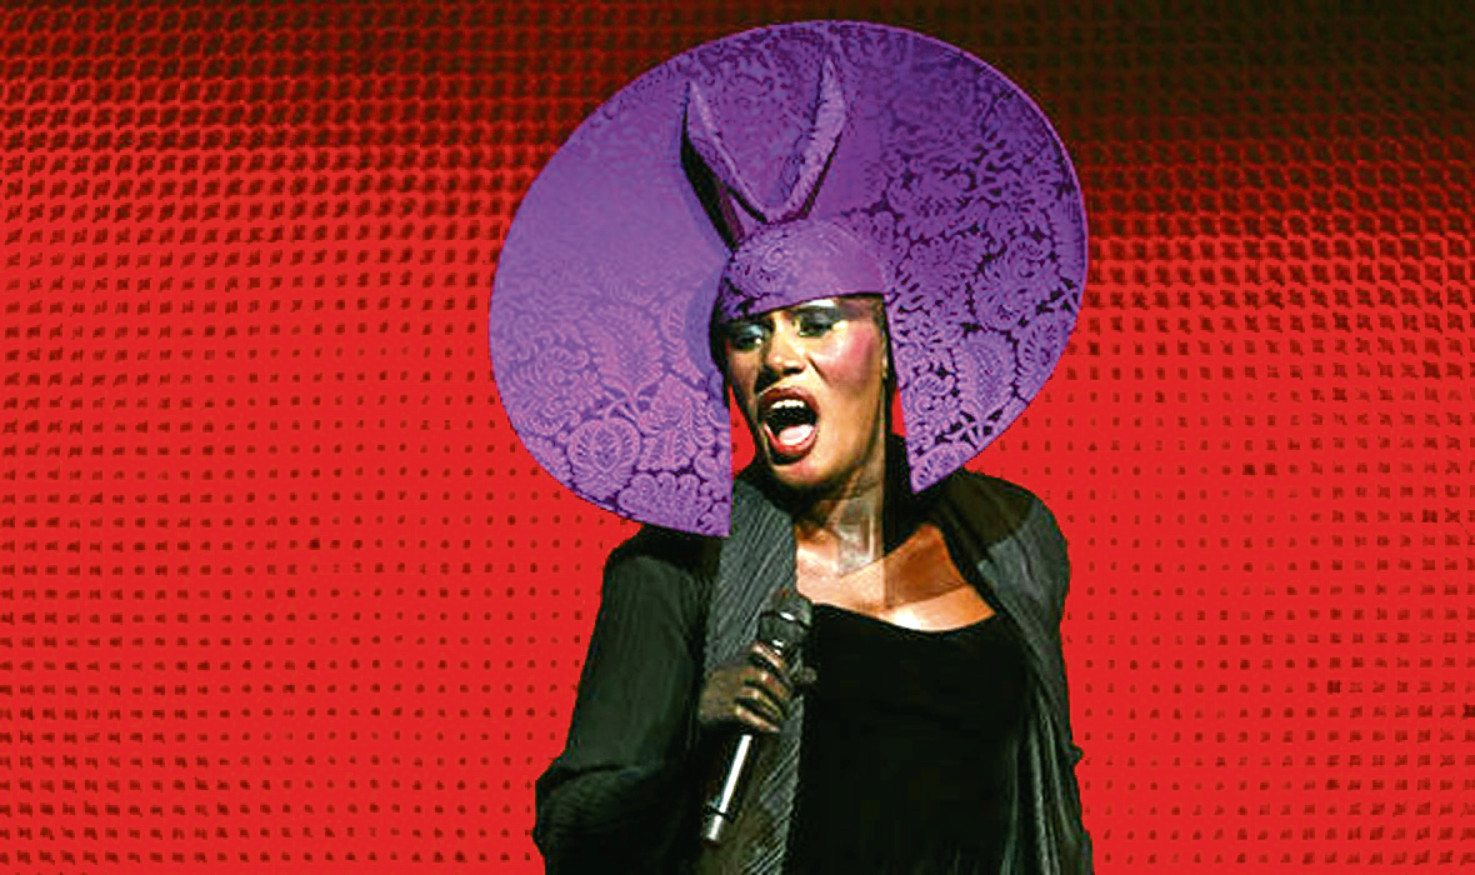 ’80s megastar Grace Jones, now a spritely 69, continues to perform flamboyantly